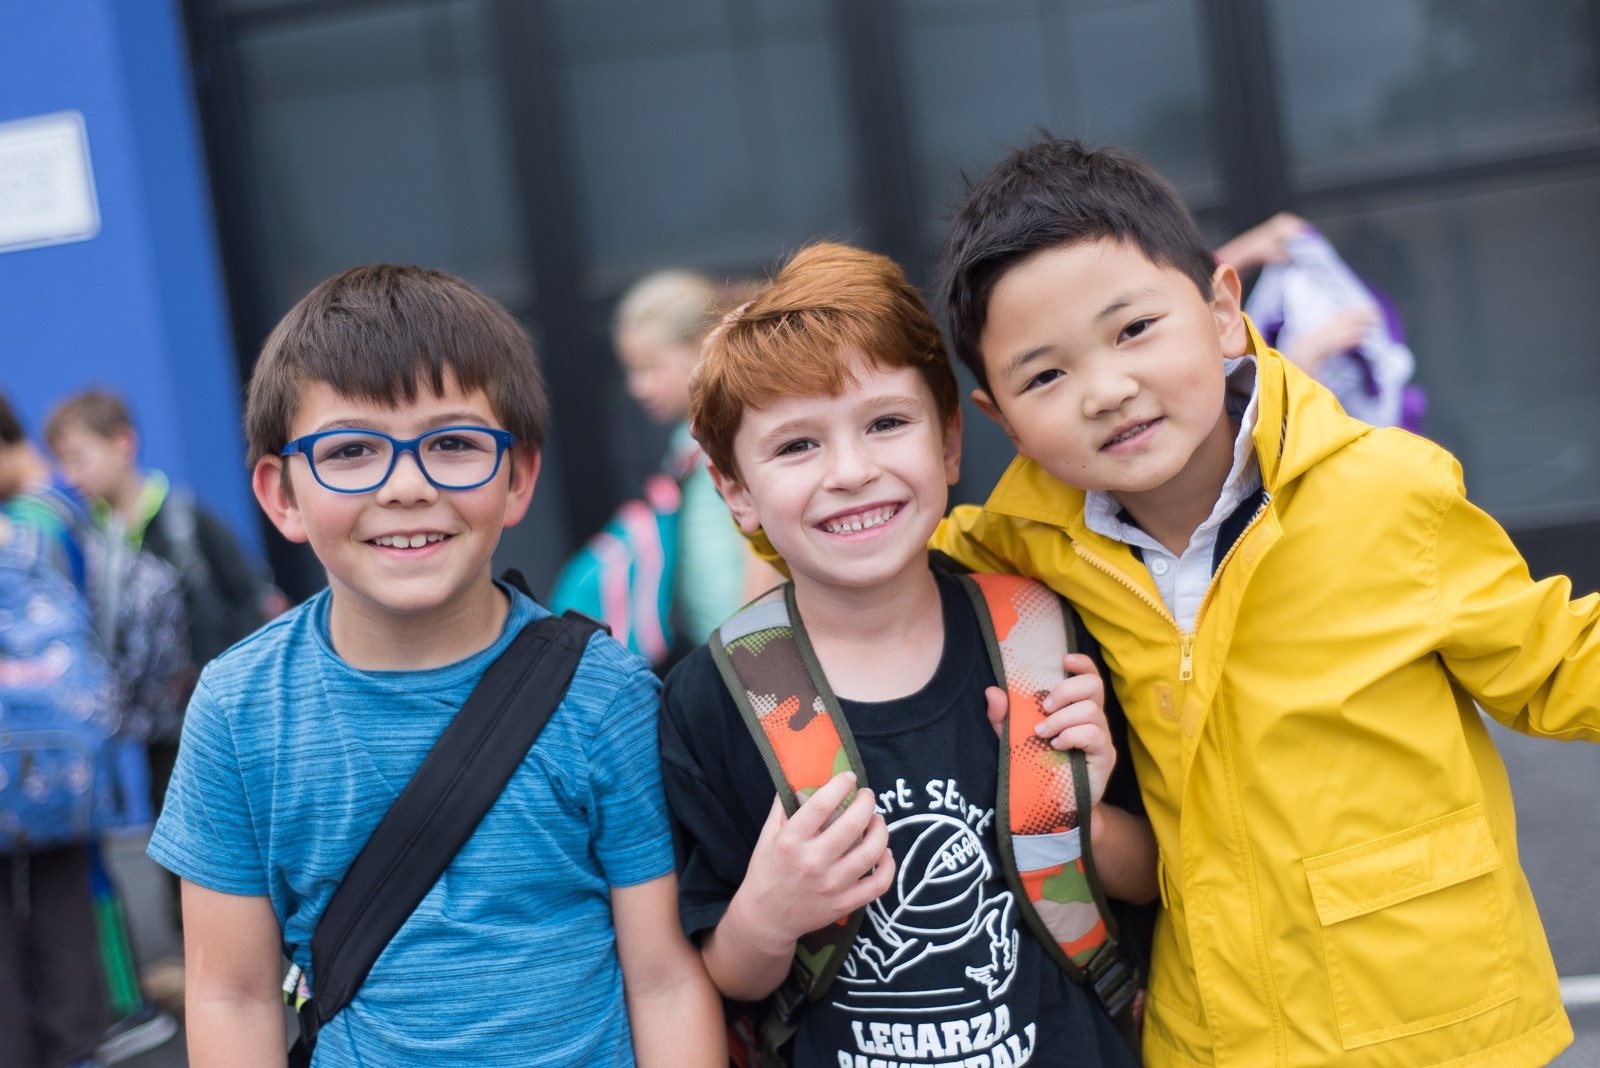 It's Back-to-School Time! Tips to Help Your Elementary-Aged Child Have a Smooth Transition